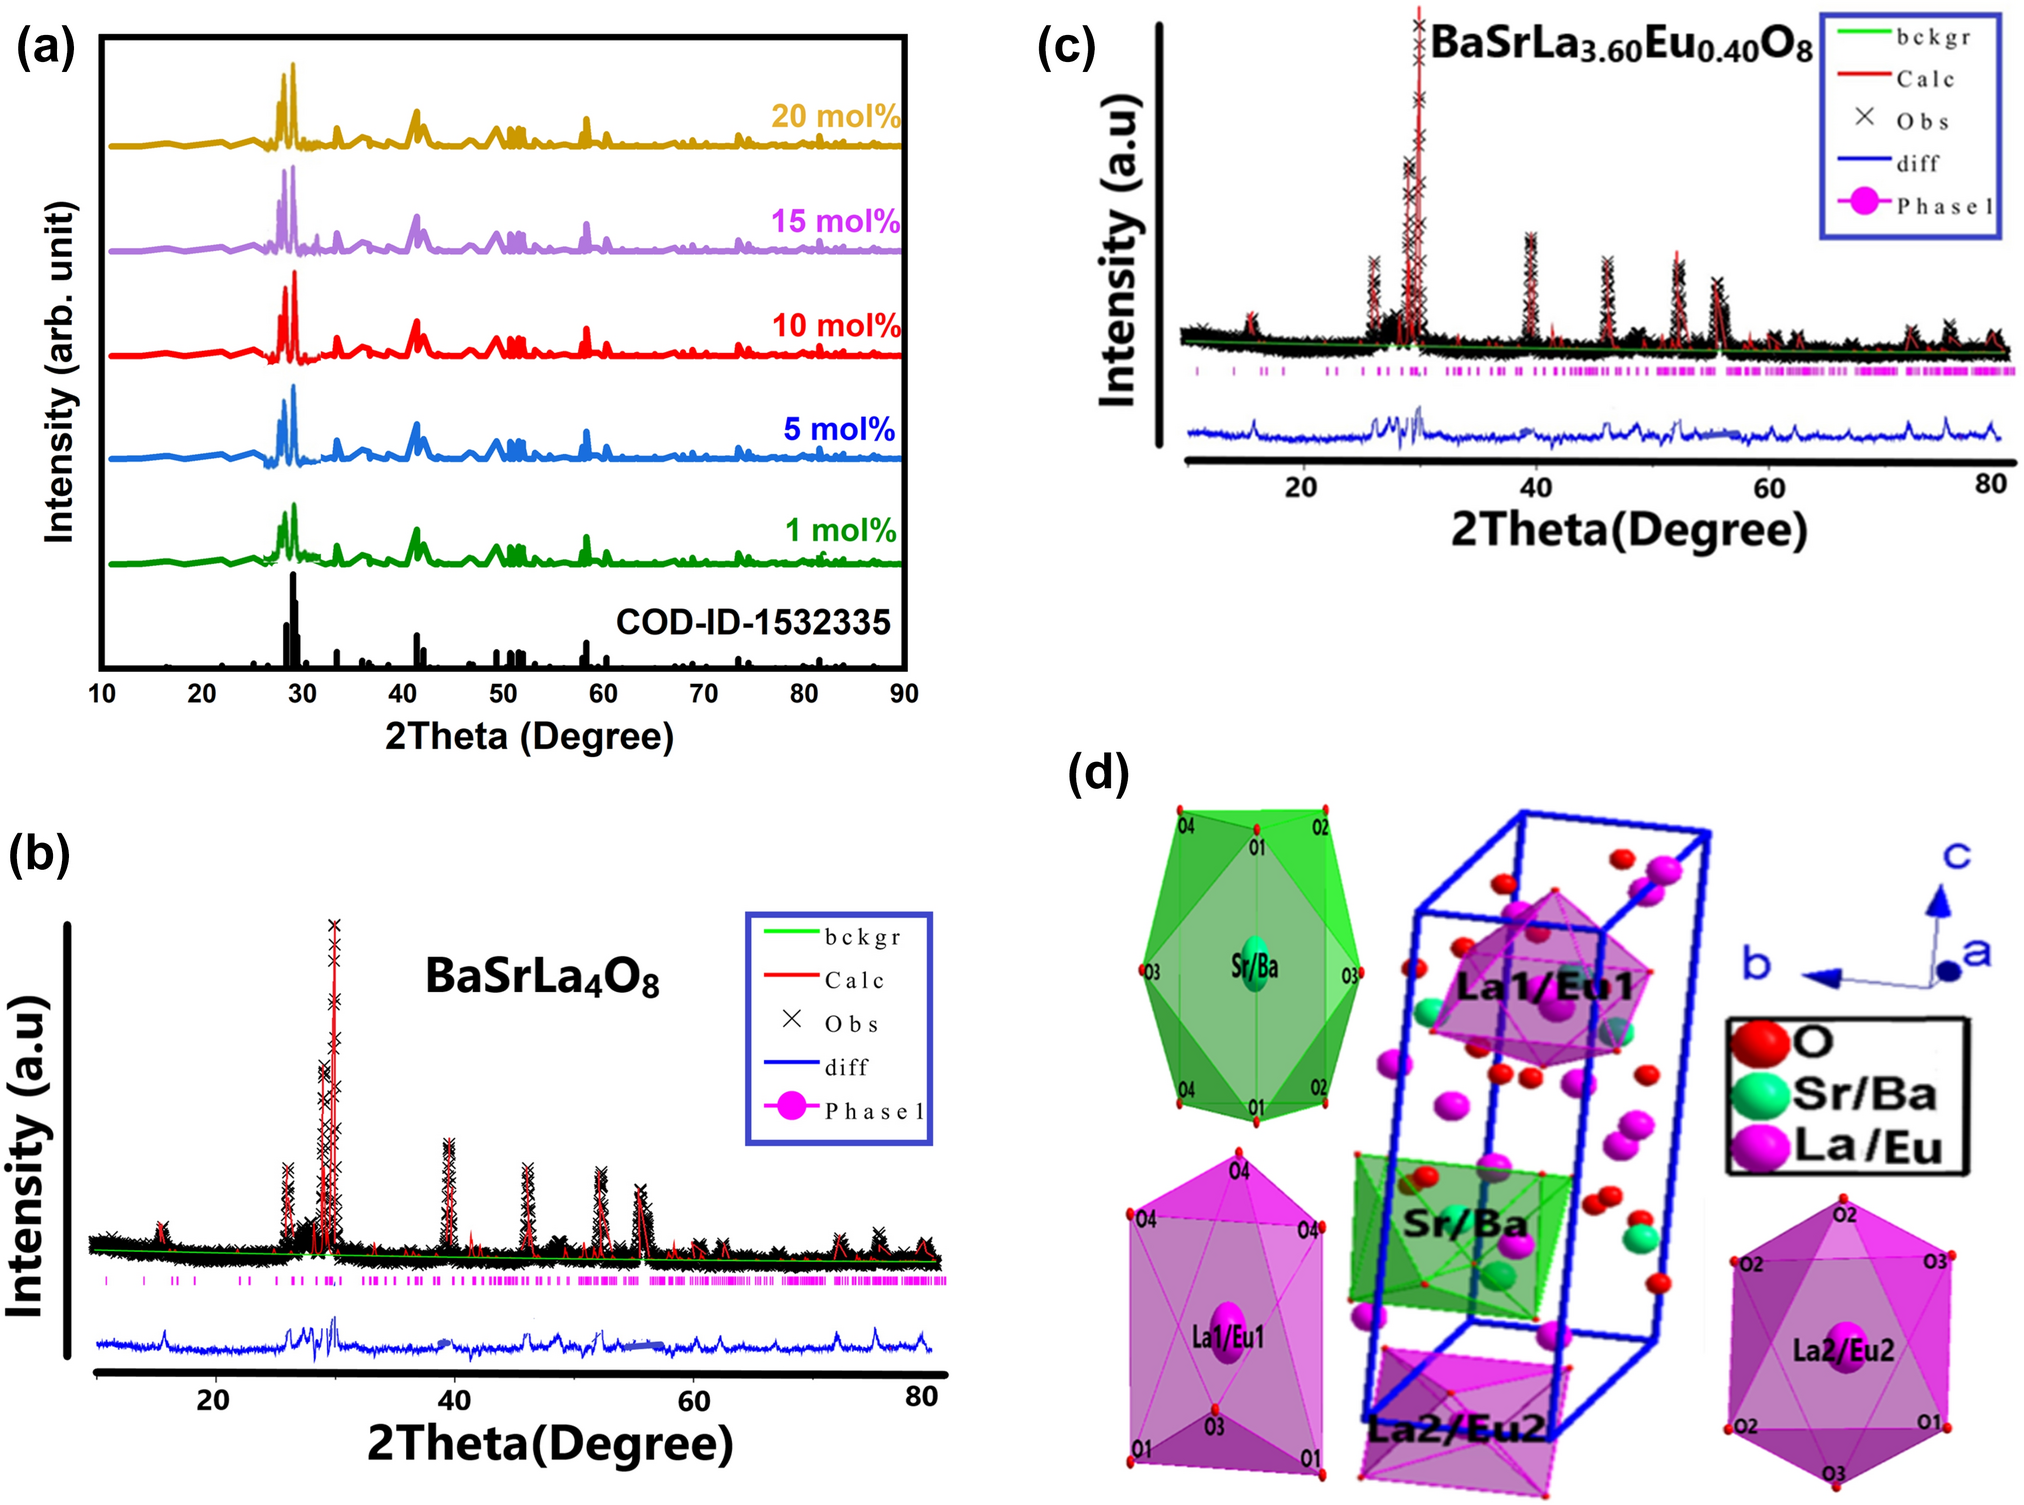 Diverse crystallographic and luminescence aspects of Eu3+ activated new BaSrLa4O8 nanophosphor for progressive optoelectronic applications